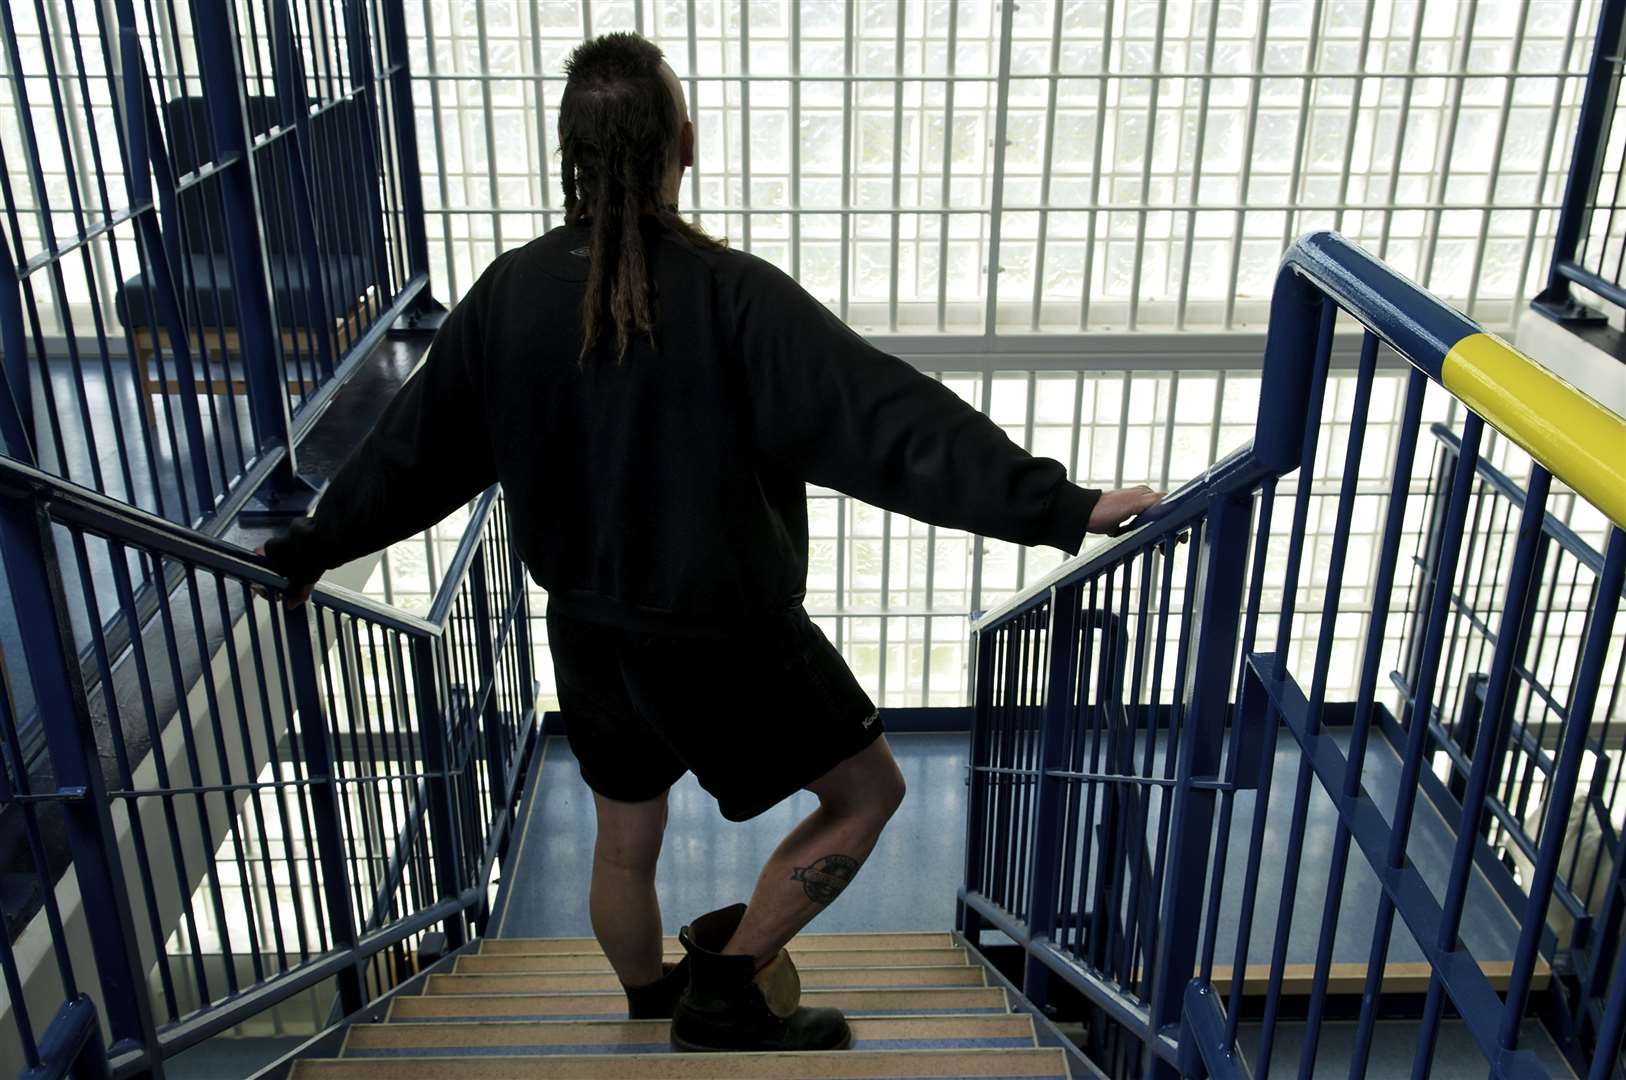 12% of cases in Swale come from prisons or care homes